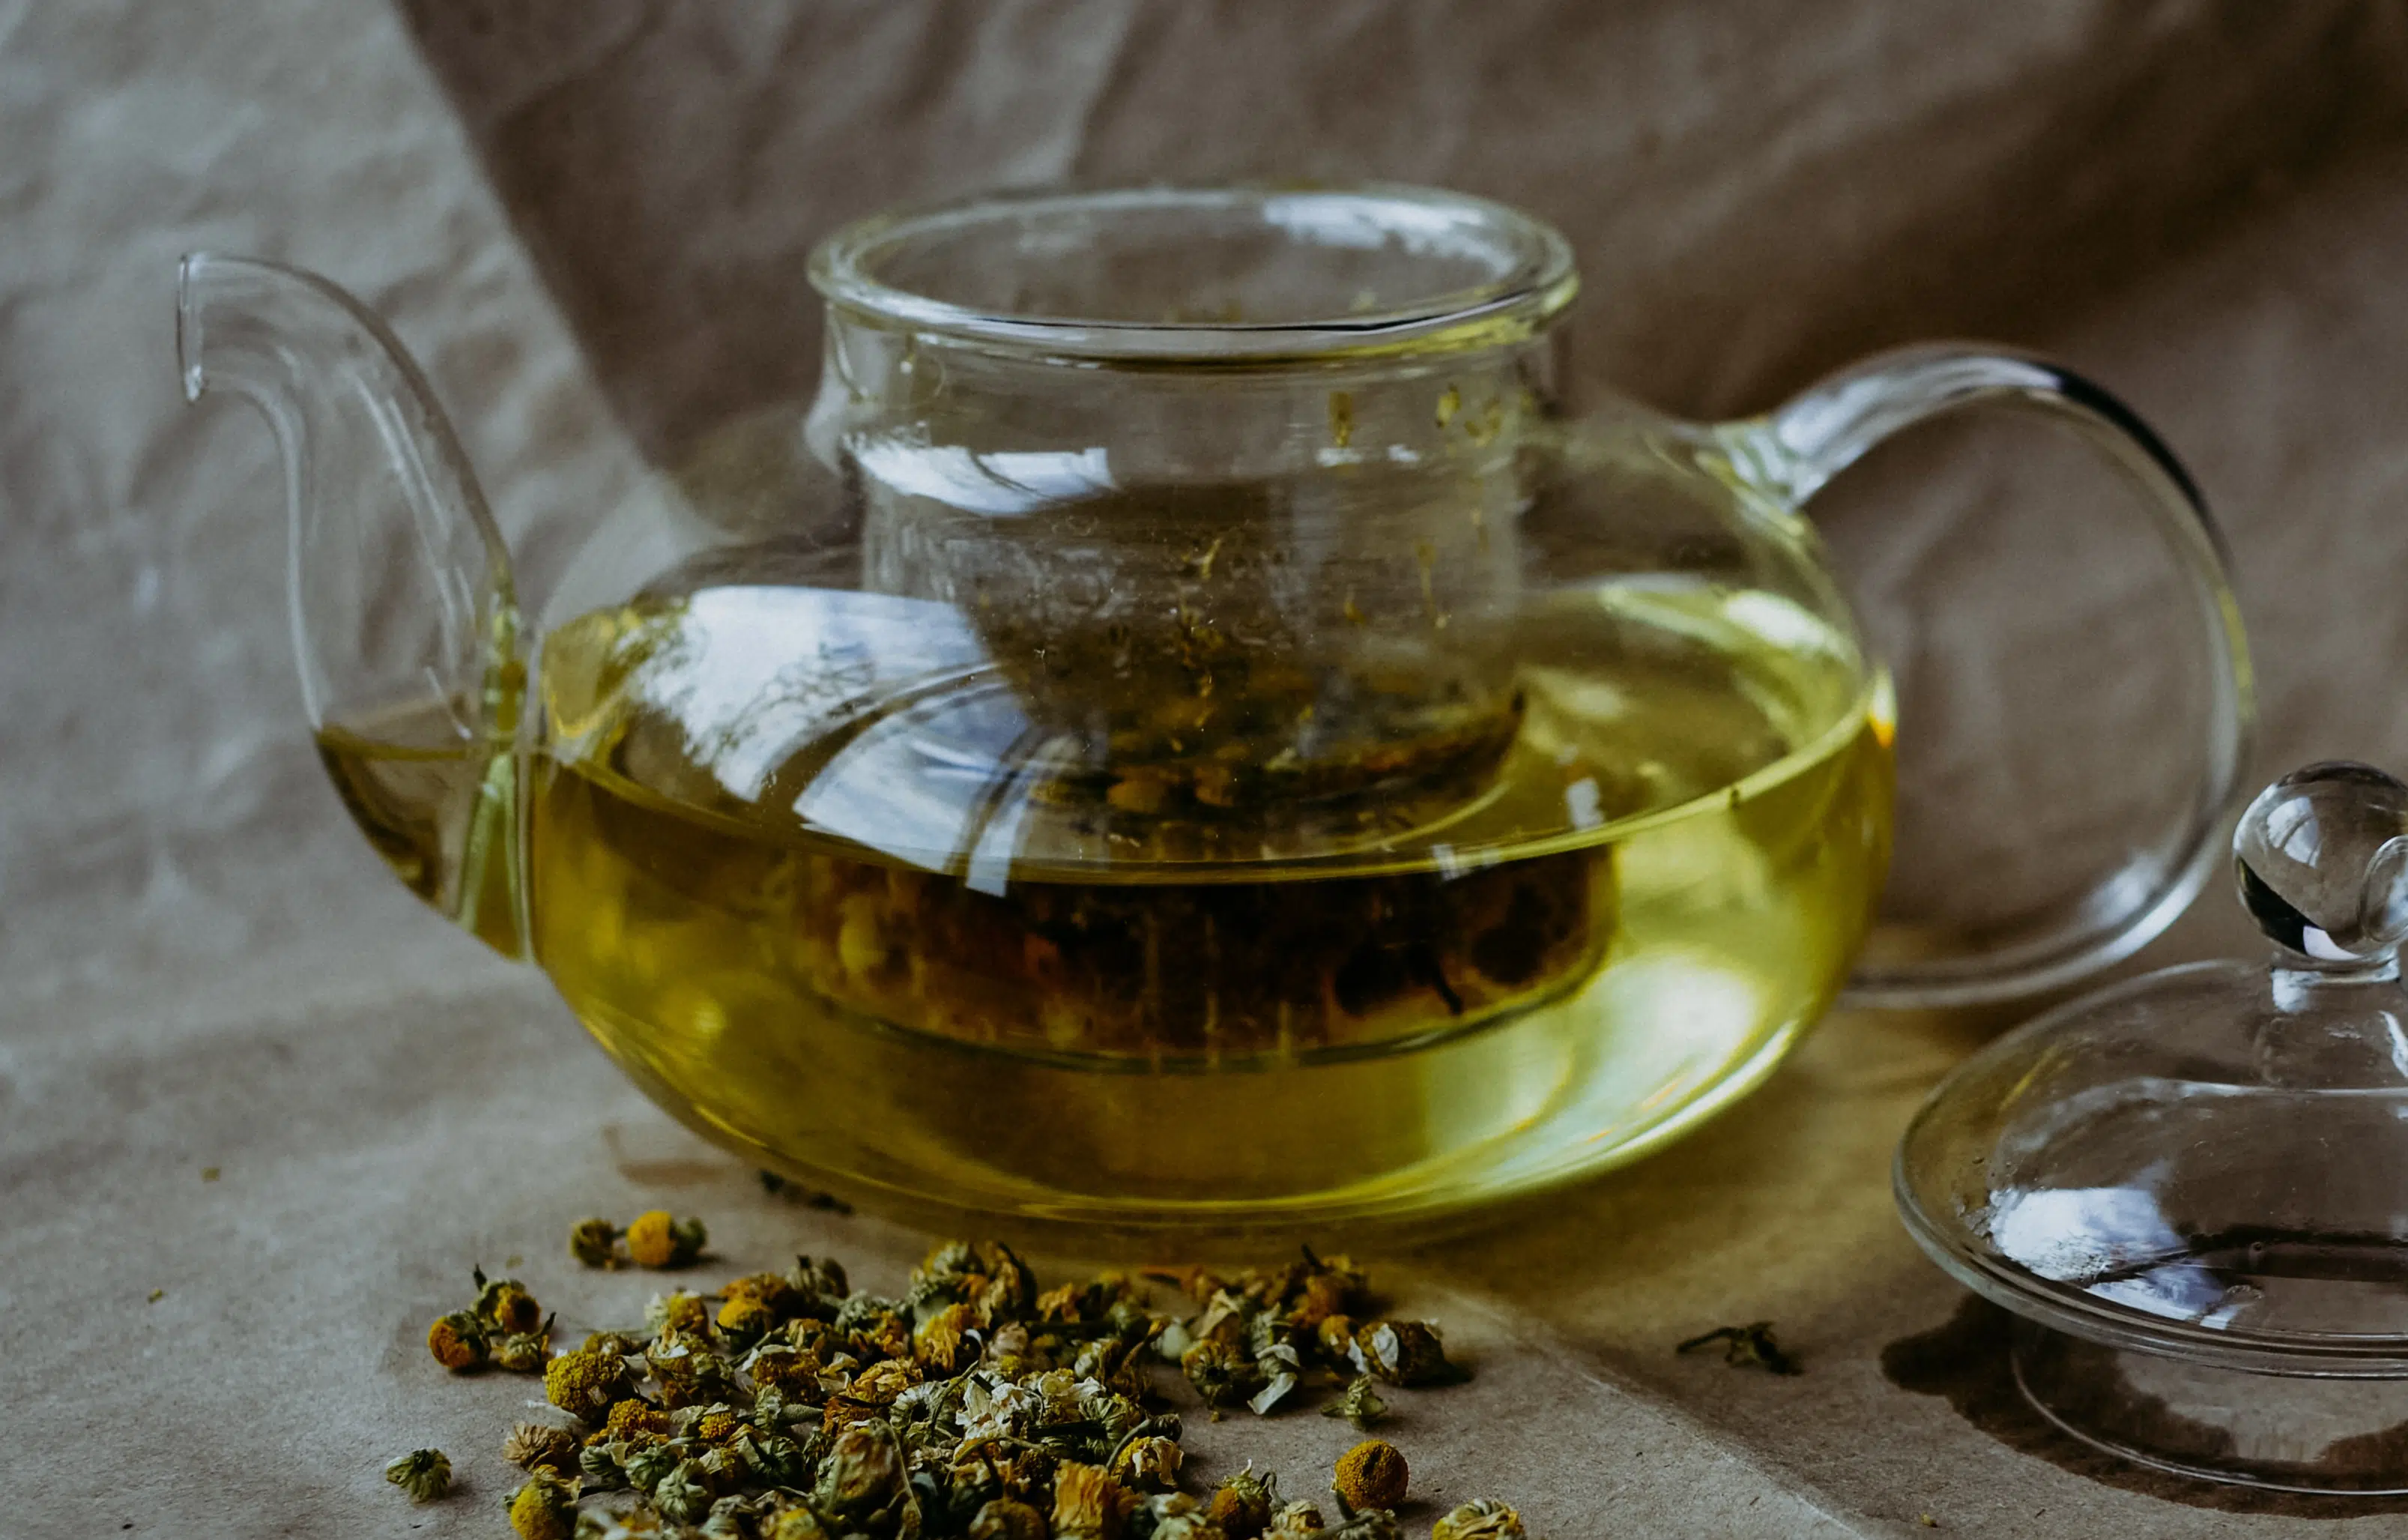 What are the possible effects of green tea on skin health? 1